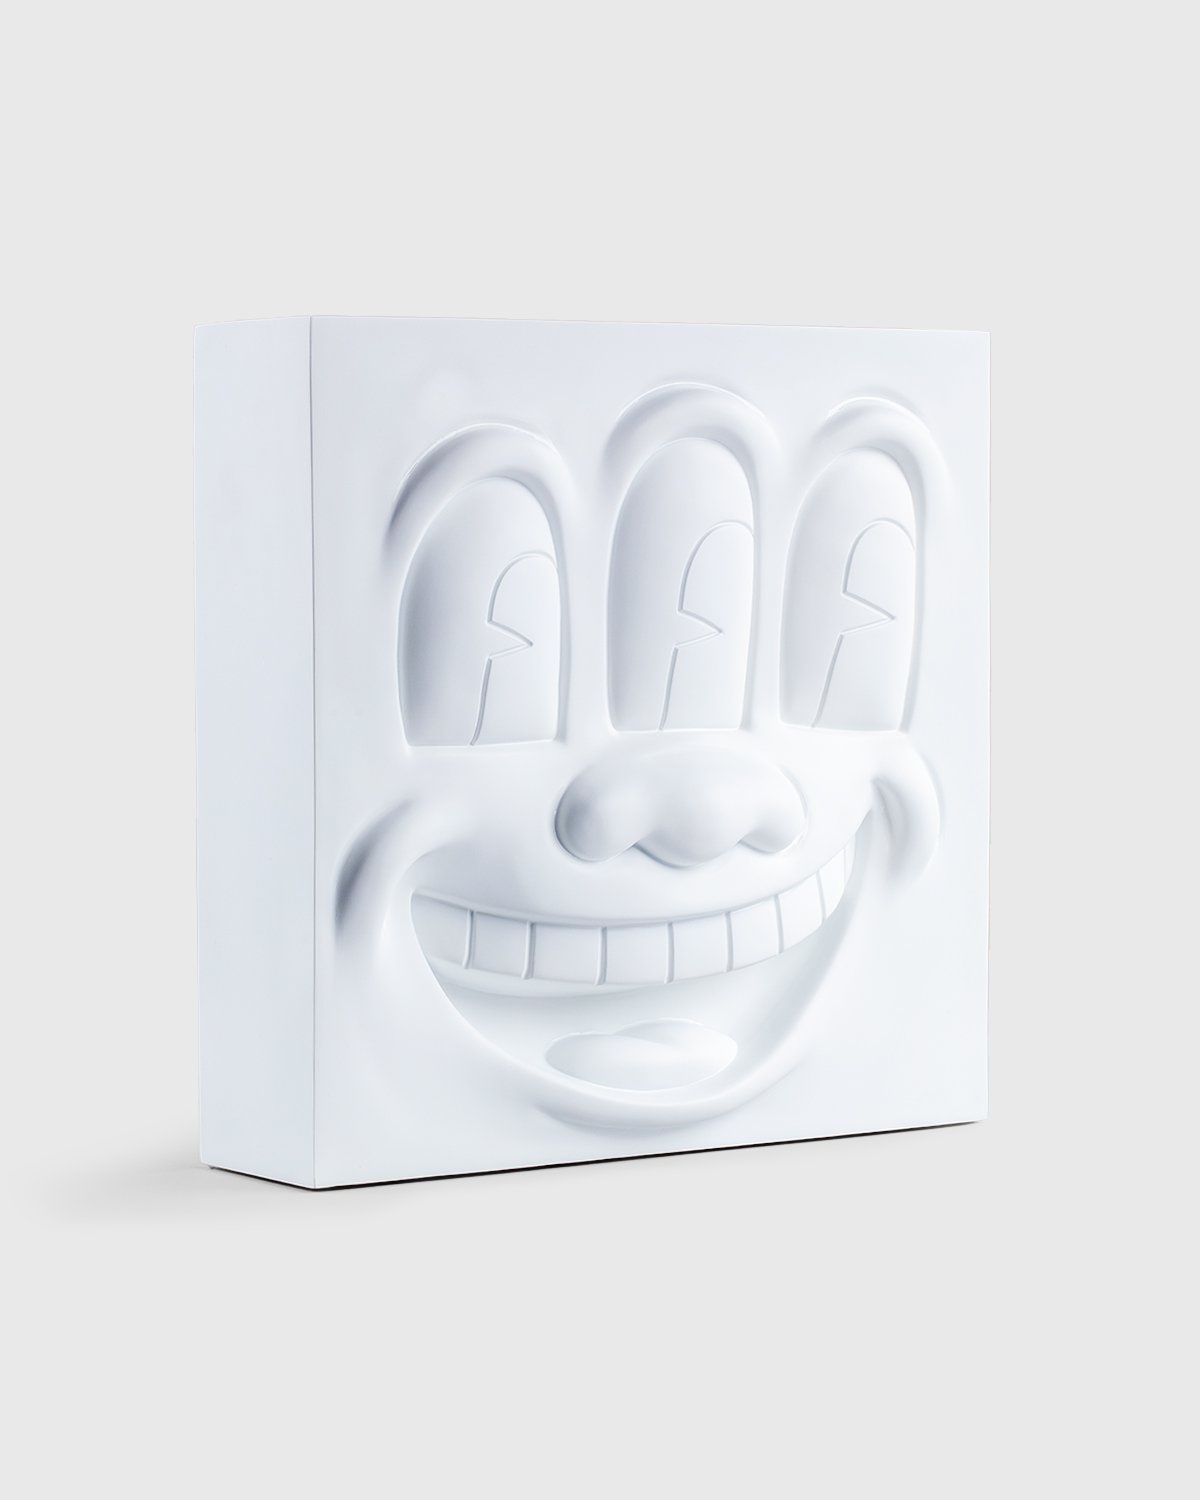 Medicom – Keith Haring Three Eyed Smiling Face Statue White - Arts & Collectibles - White - Image 2